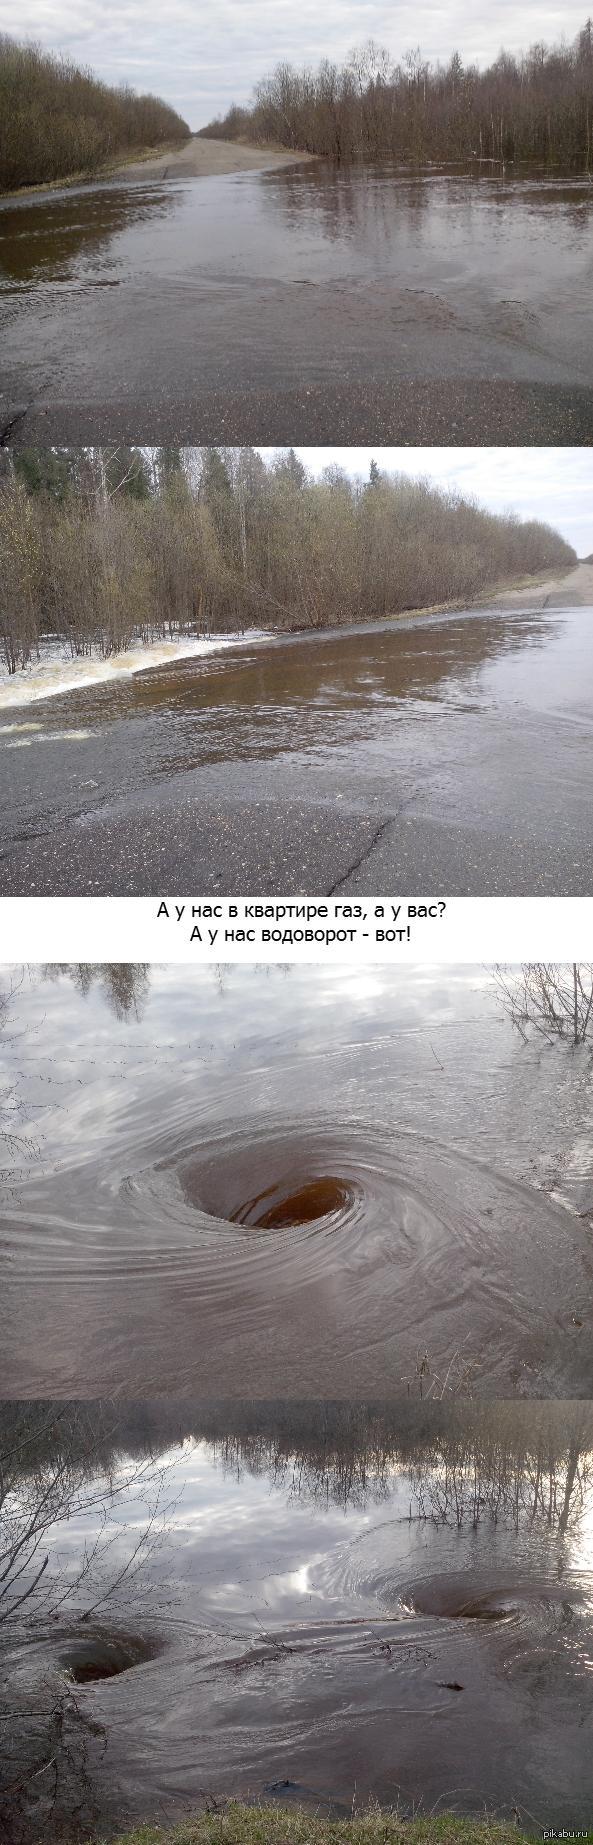 Spring - My, Russia, Road, Crossing, Fishing, Swimming